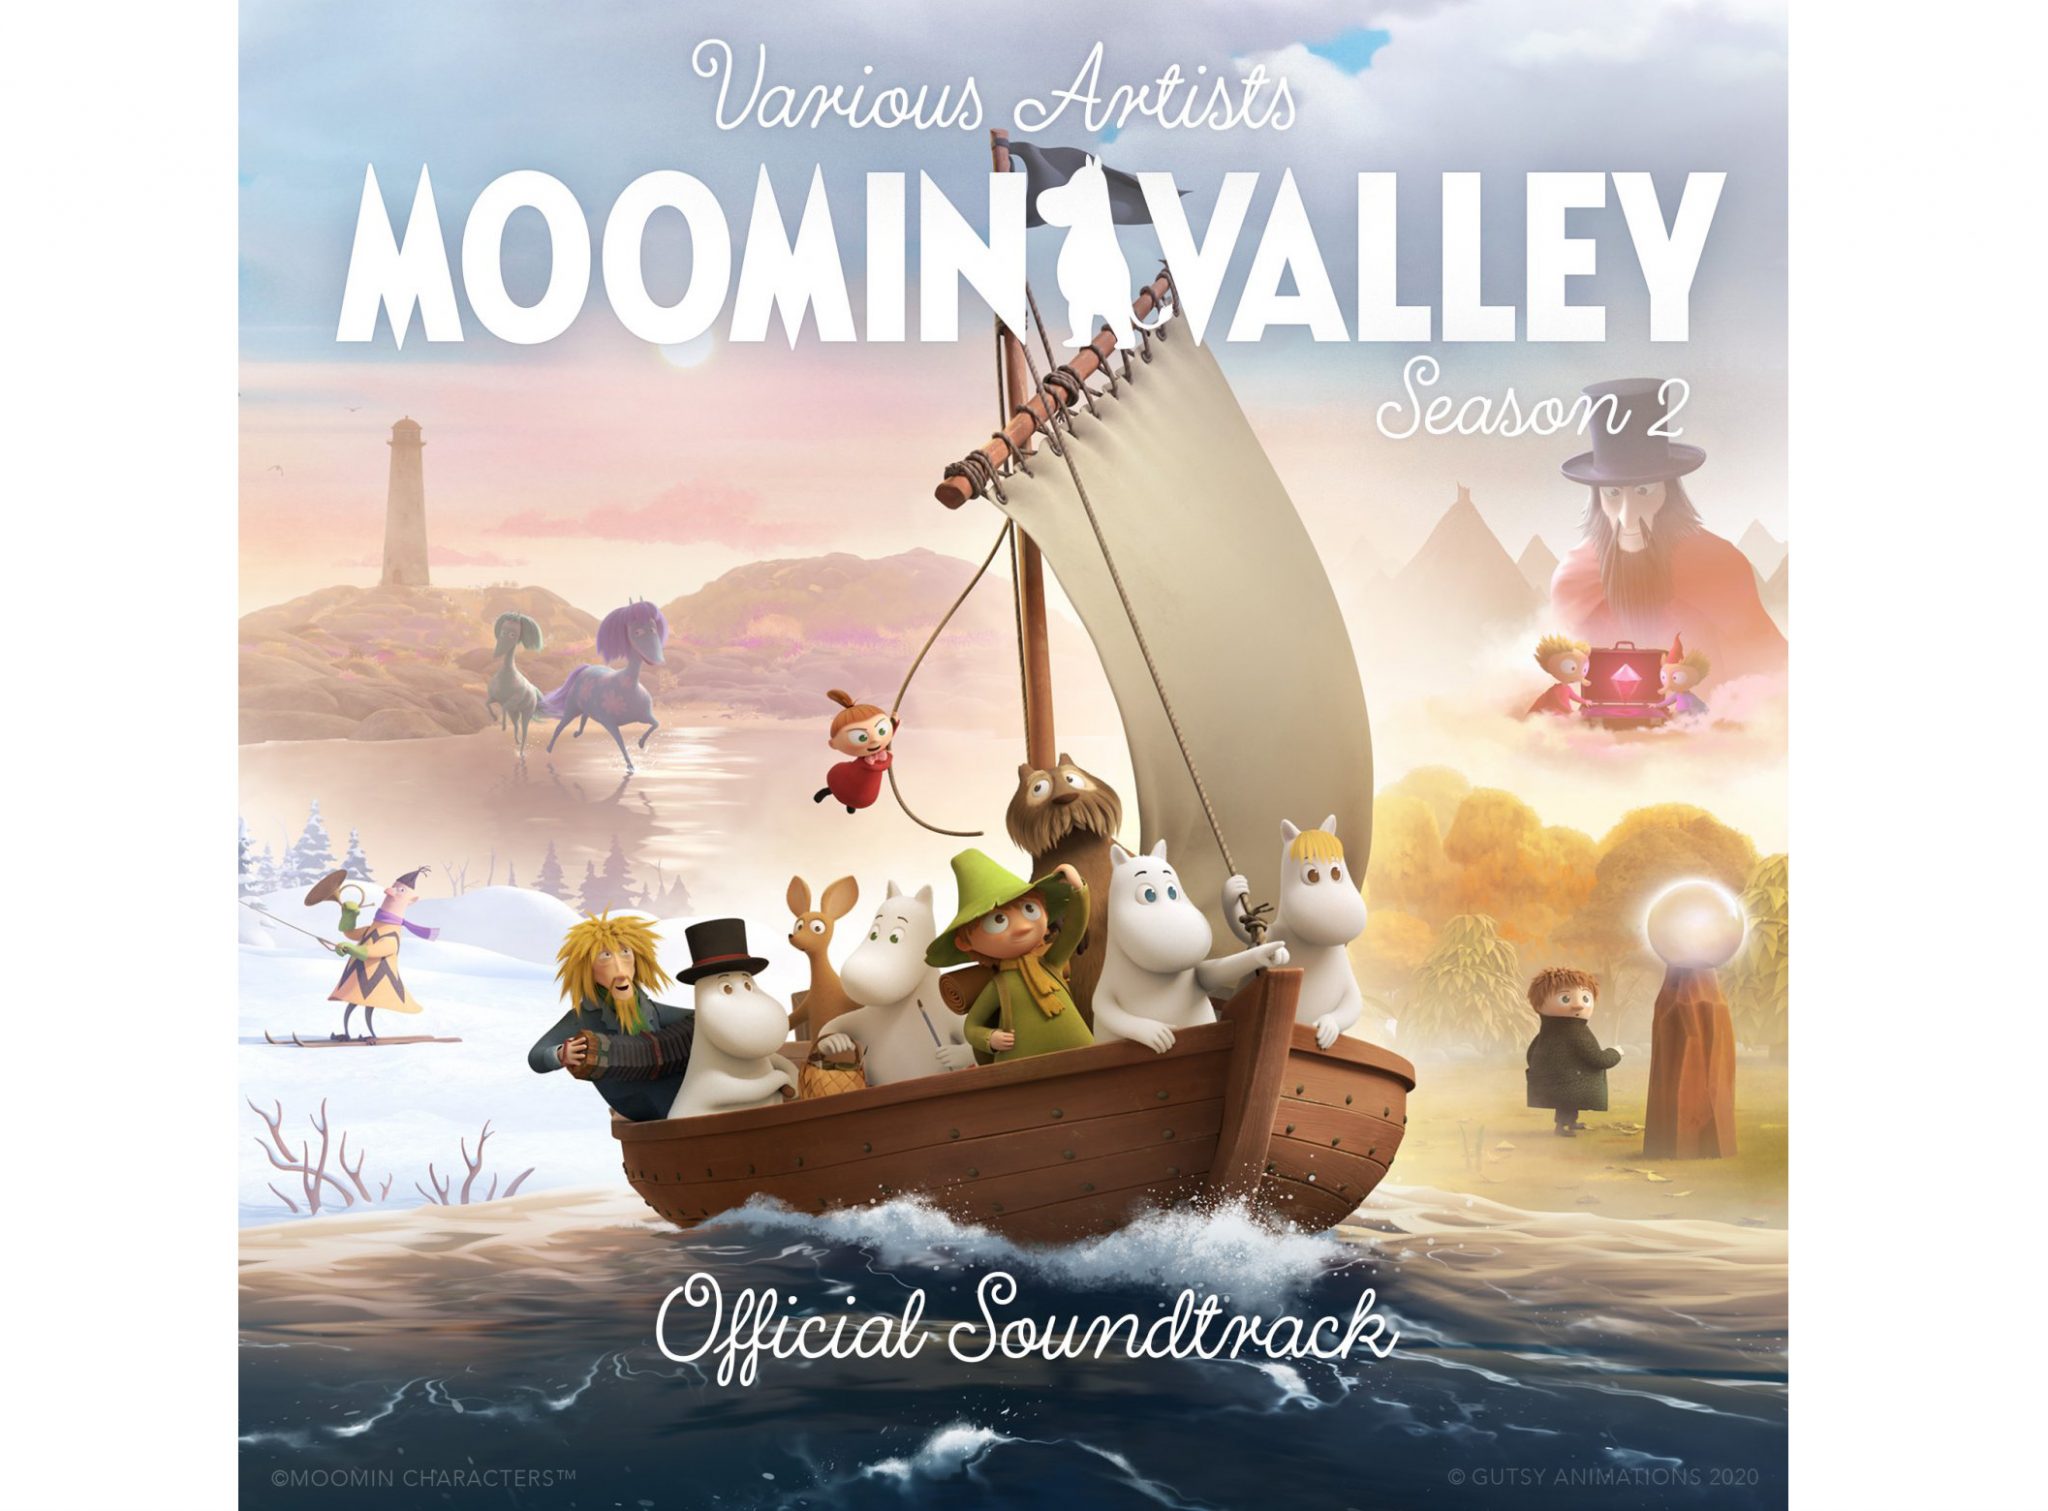 Moominvalley Season 2 Soundtrack: Girl In Red - Something New